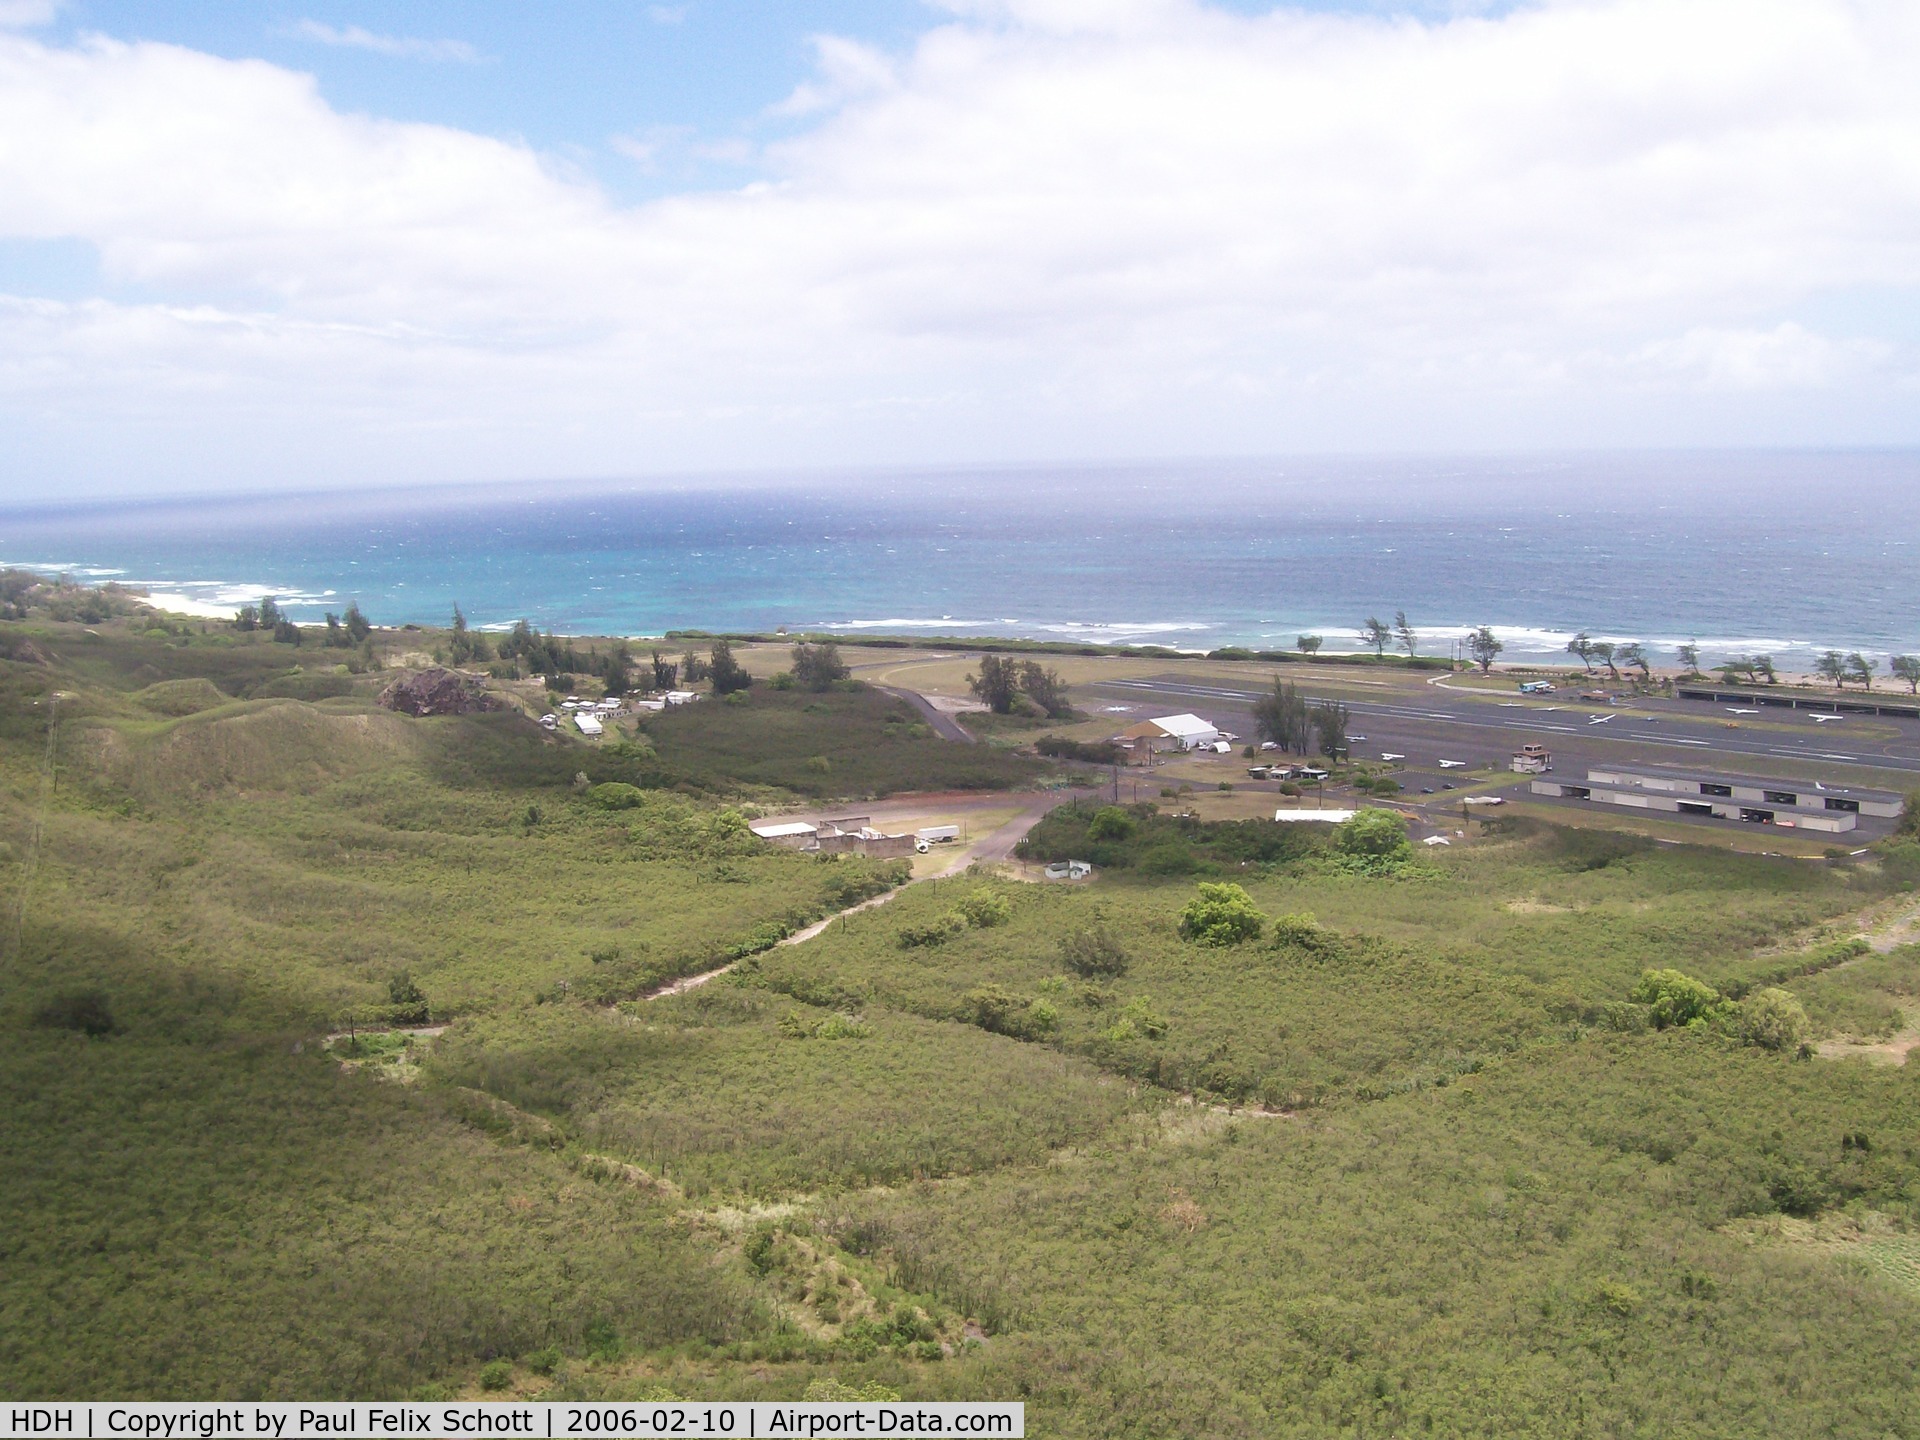 Dillingham Airfield Airport (HDH) - Flying military aircraft low along side the Mt. Ridge Dillingham Airfield Hawaii. Photo is looking northeast at runway